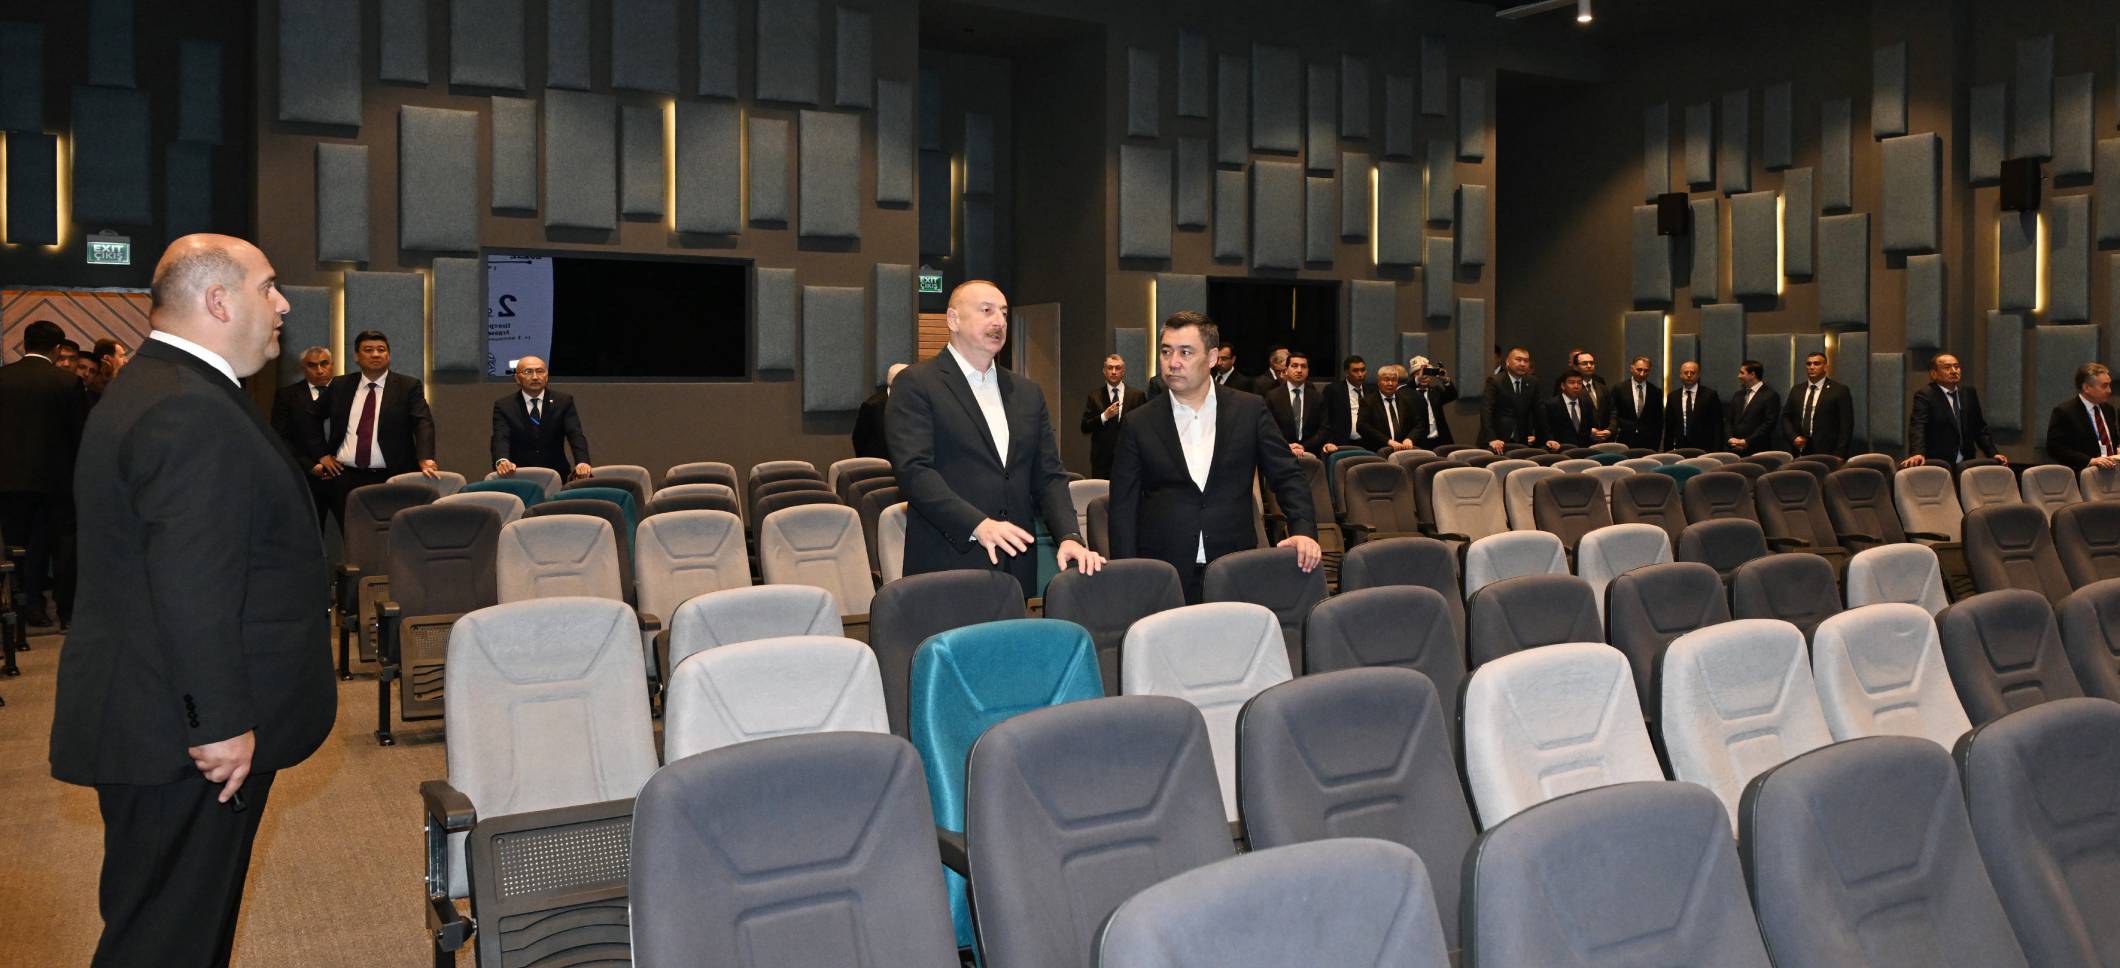 Presidents of Azerbaijan and Kyrgyzstan visited Aghdam Conference Center